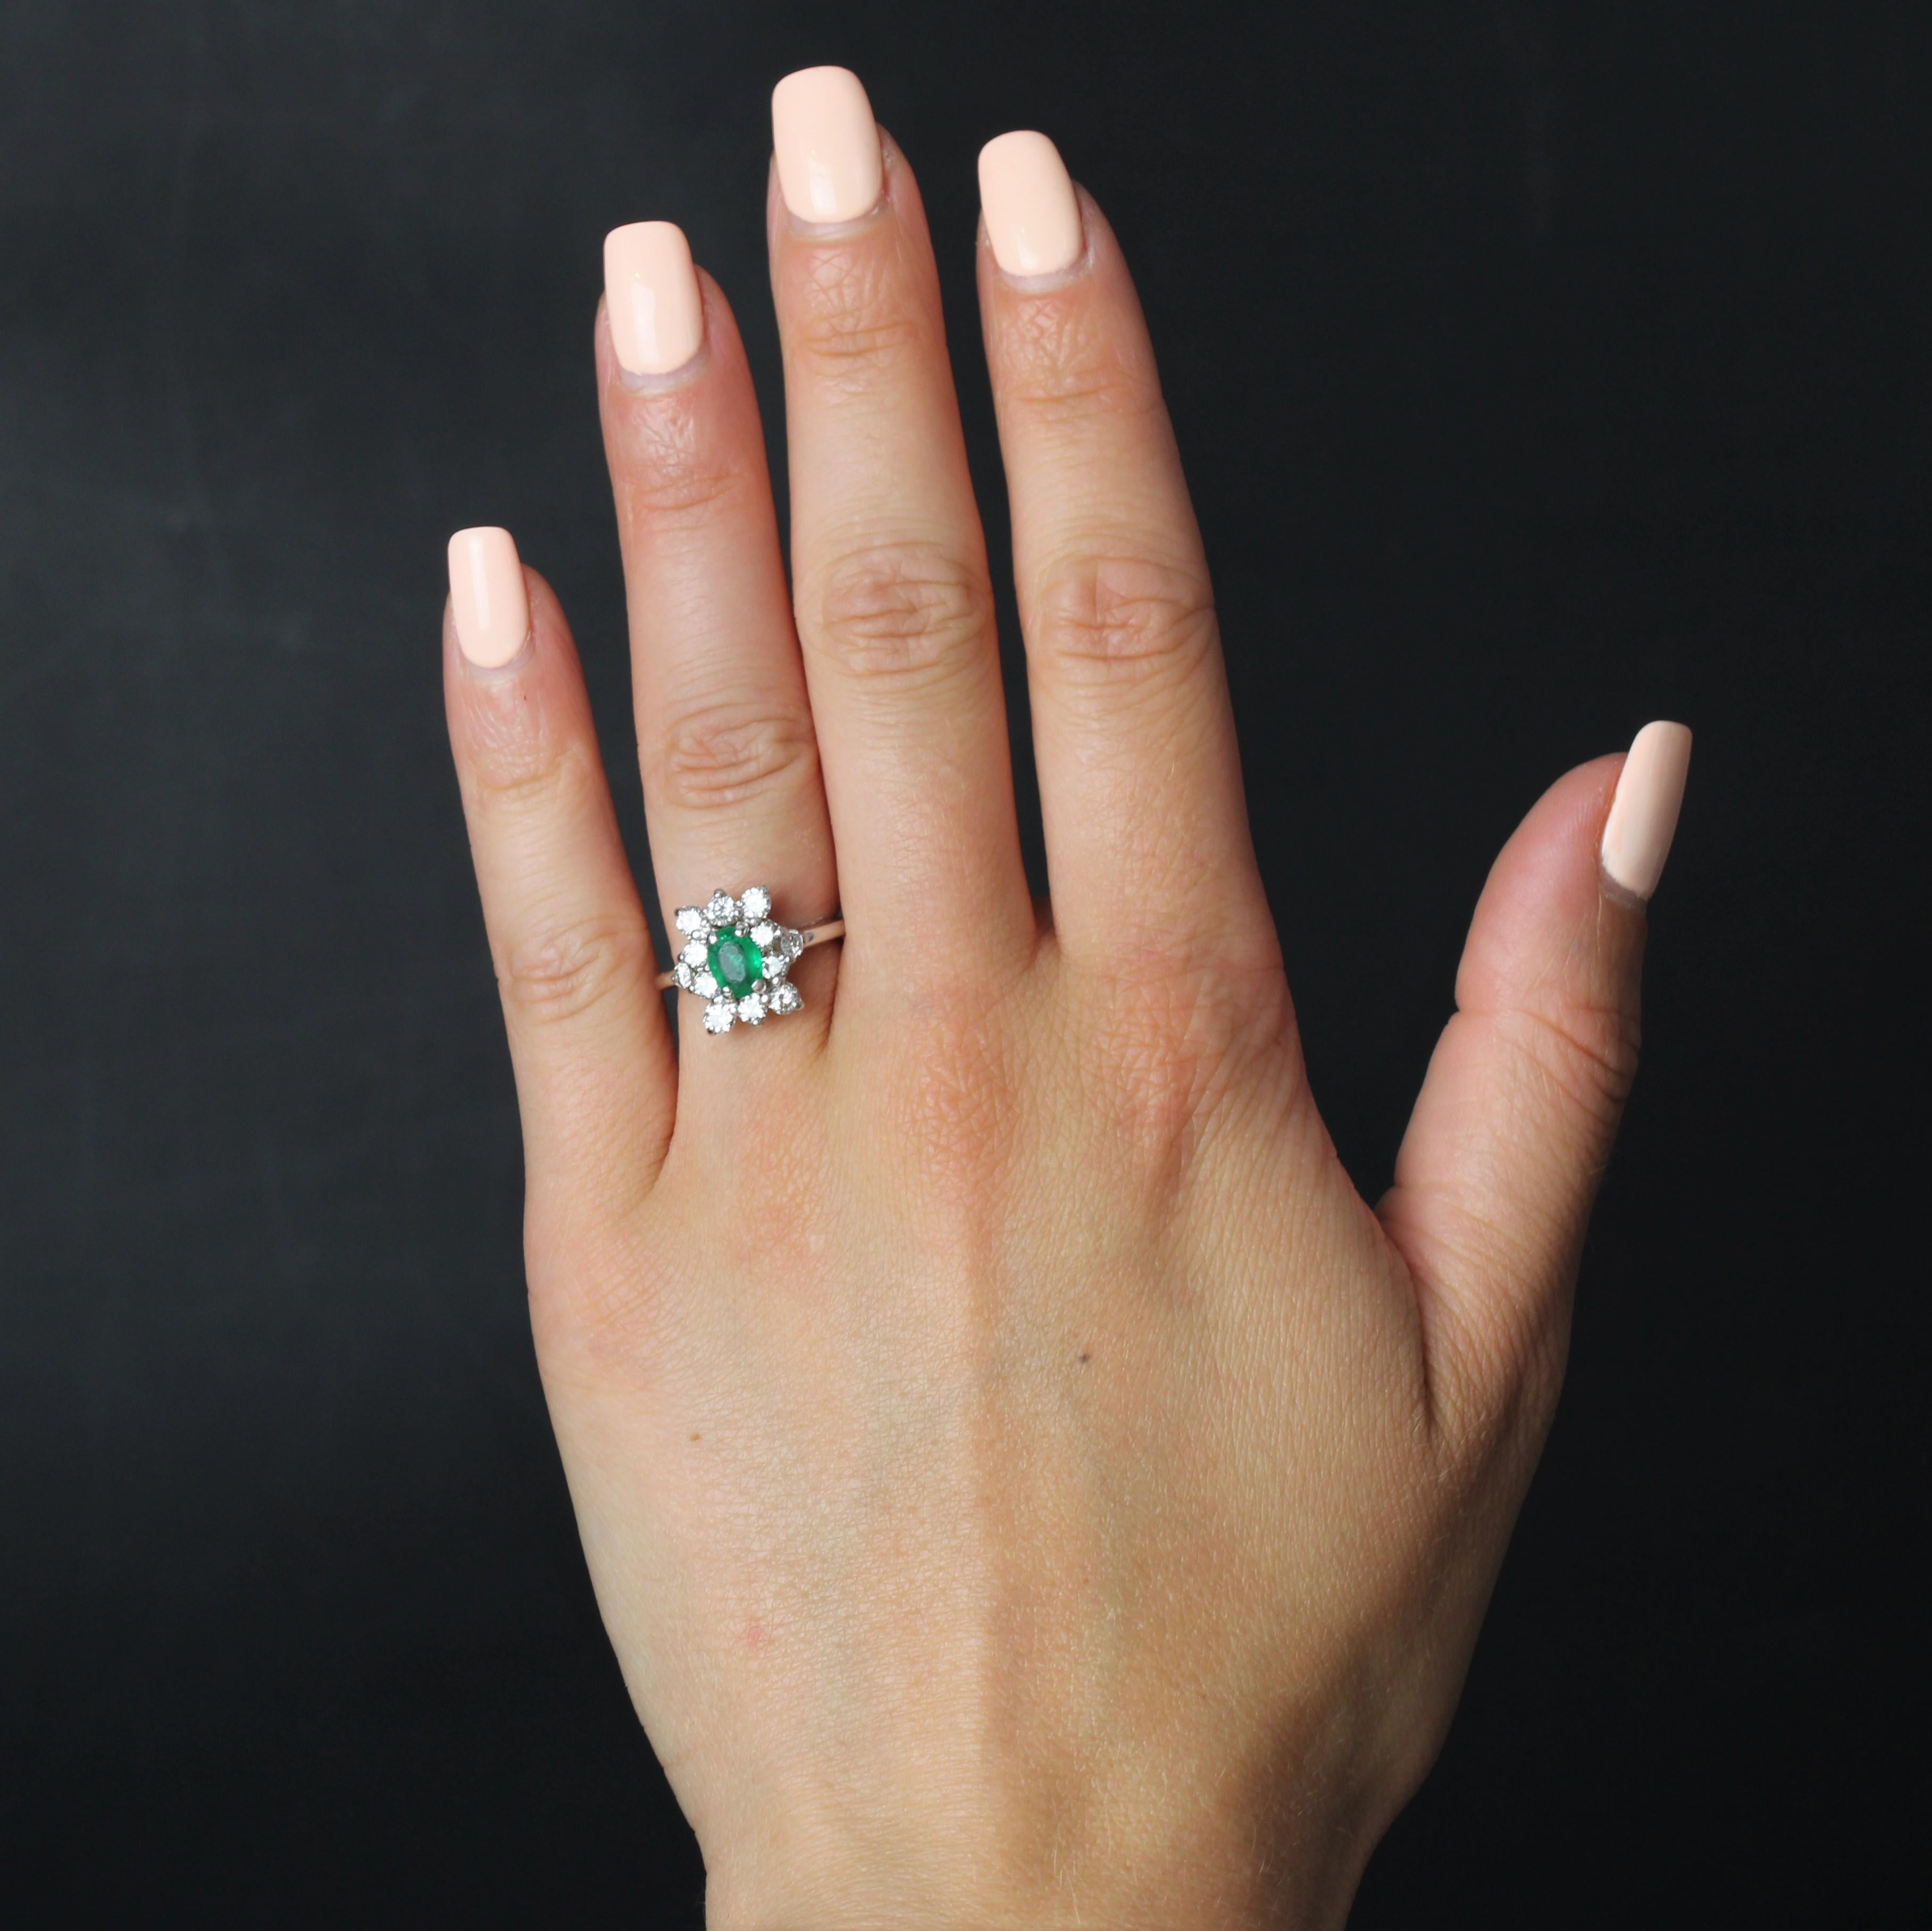 Ring in 18 karat white gold.
This lovely daisy ring is set with a central oval emerald held in 4 claws in a surround of modern brilliant-cut diamonds also held in claws.
Total weight of emerald : 0.50 carat approximately.
Total diamond weight : 0.75